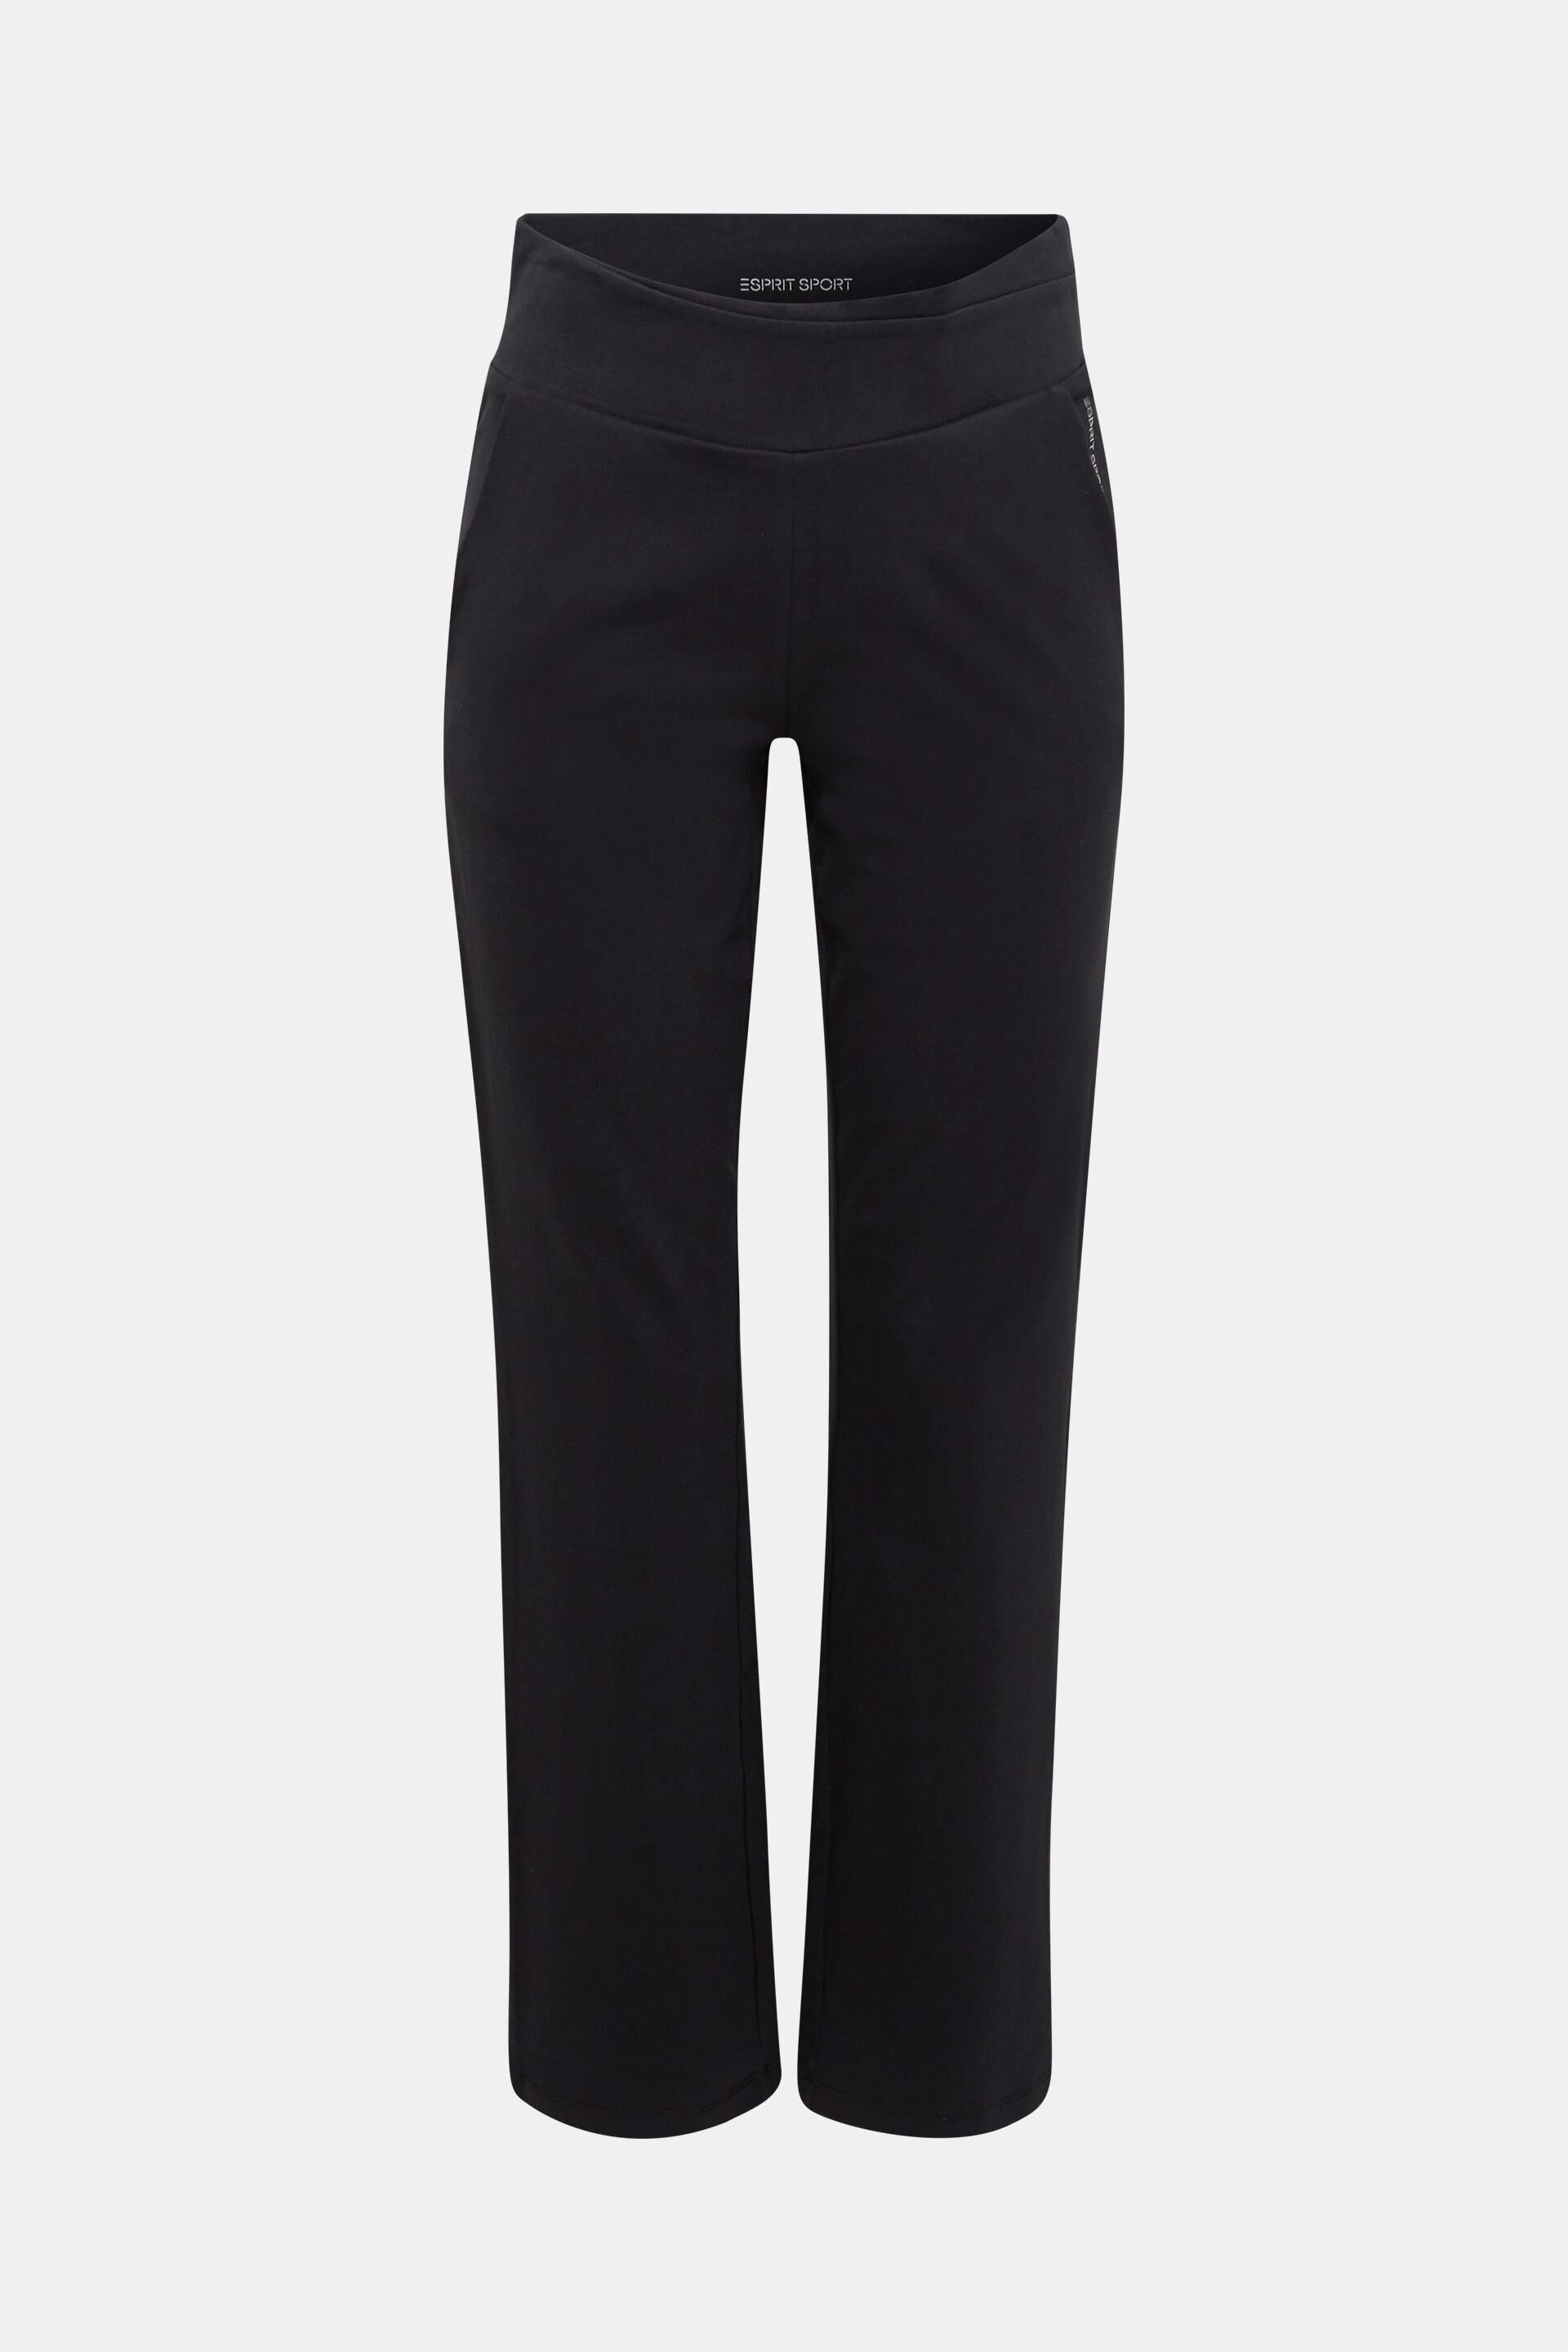 Esprit cotton organic Jersey trousers made of